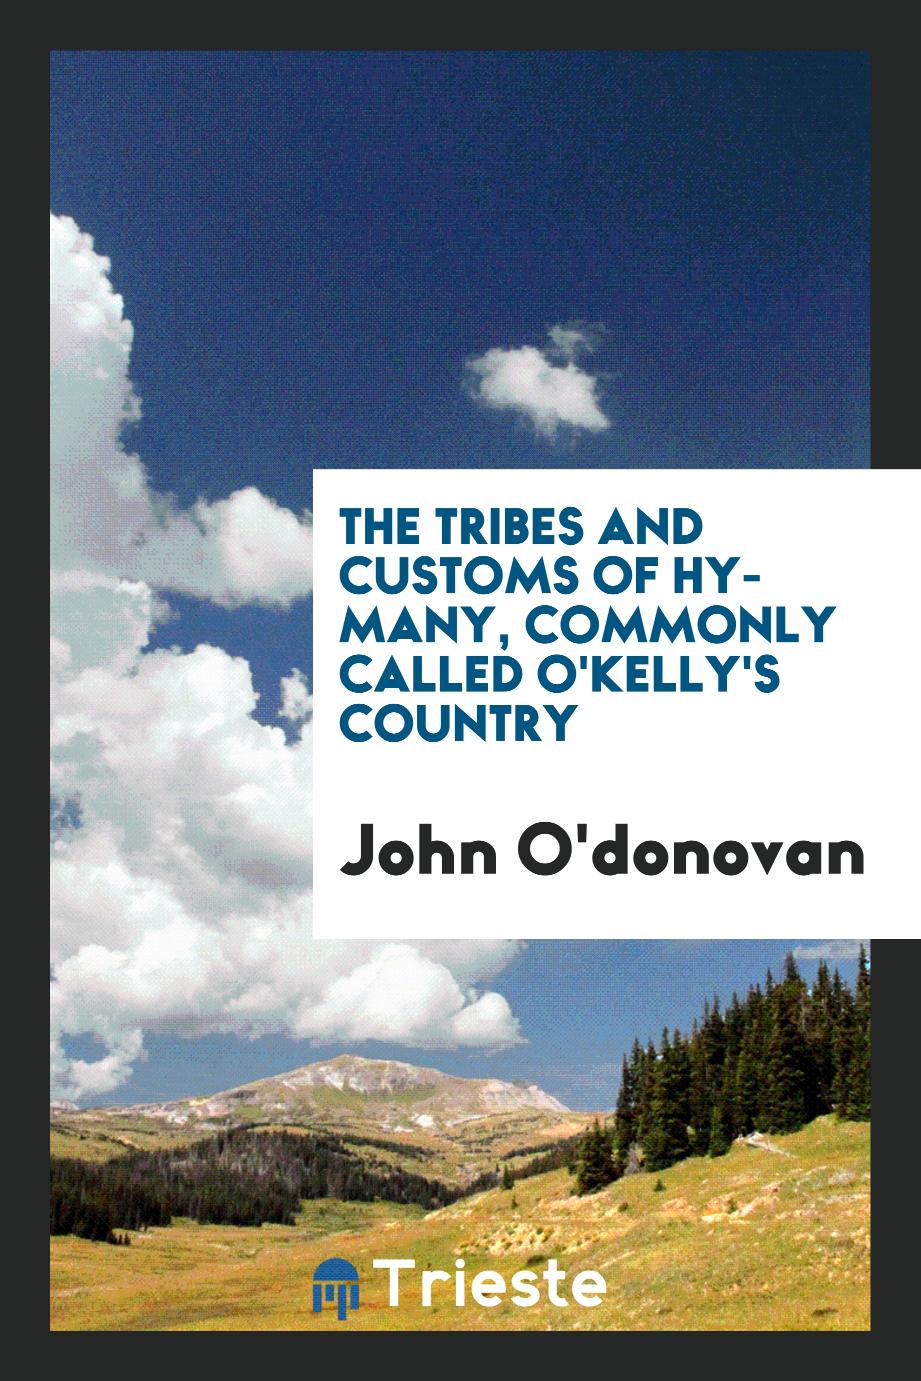 The Tribes and Customs of Hy-Many, Commonly Called O'kelly's Country